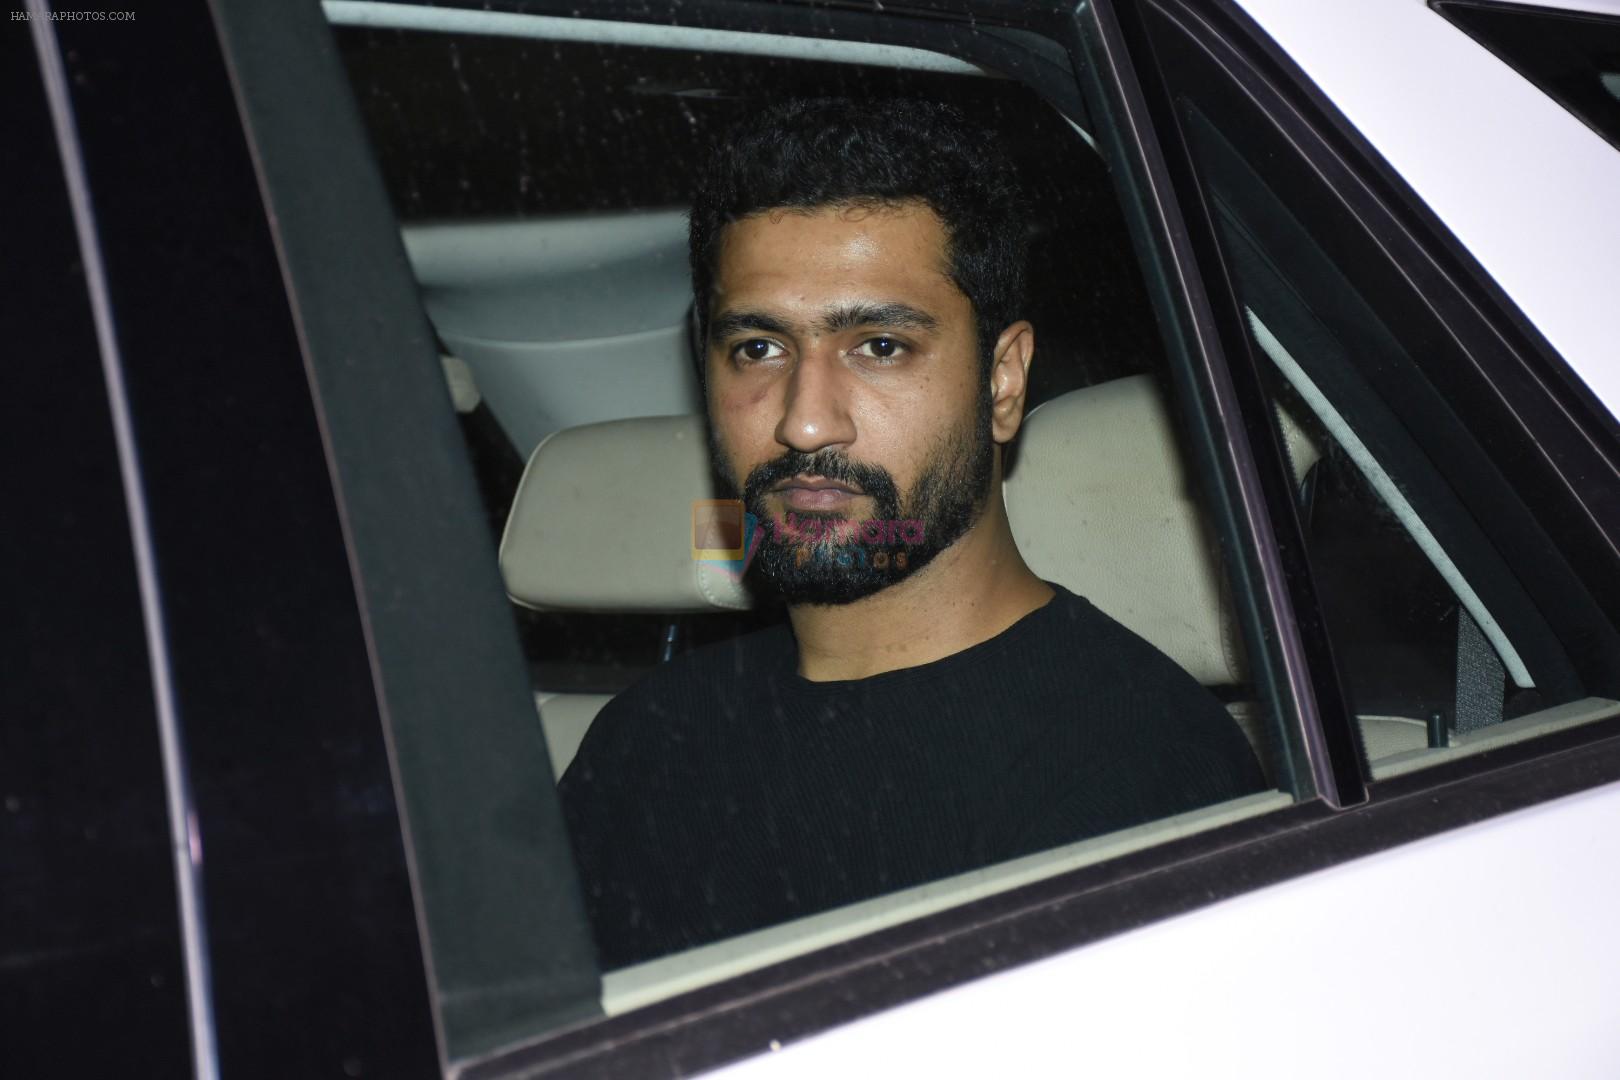 Vicky Kaushal attend party at Karan Johar's house in bandra on 12th June 2019